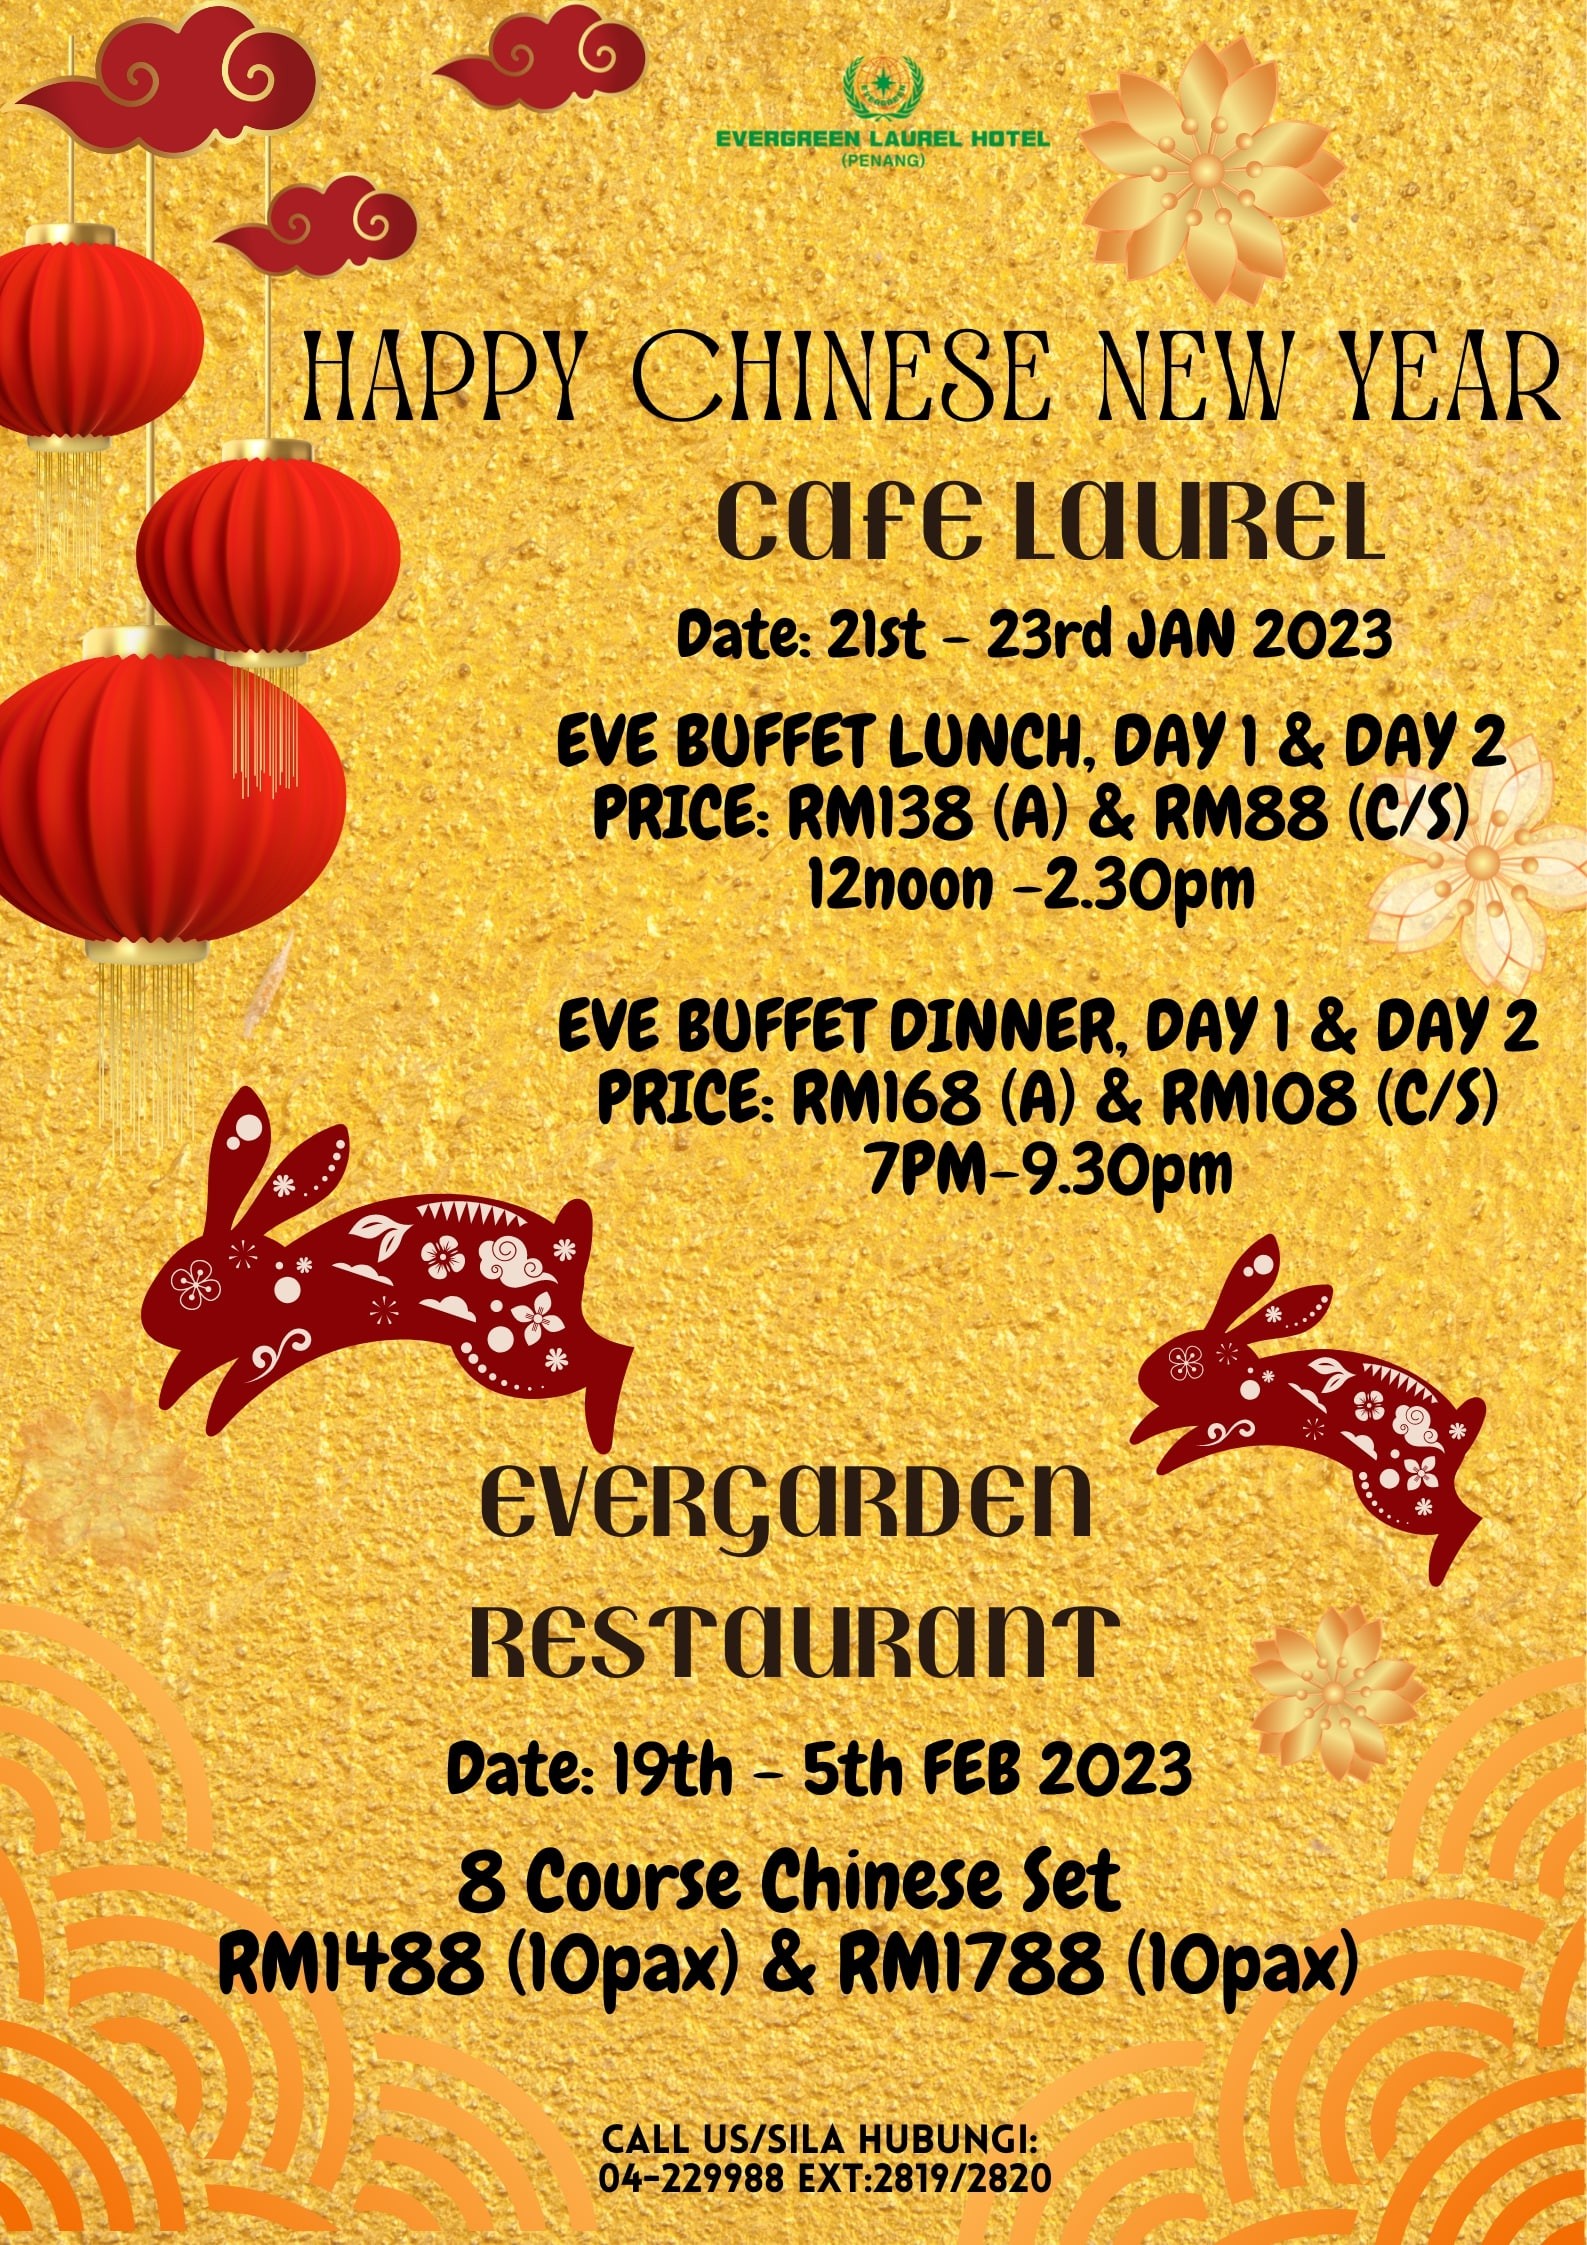 Chinese New Year Promotion by Evergreen Laurel Hotel